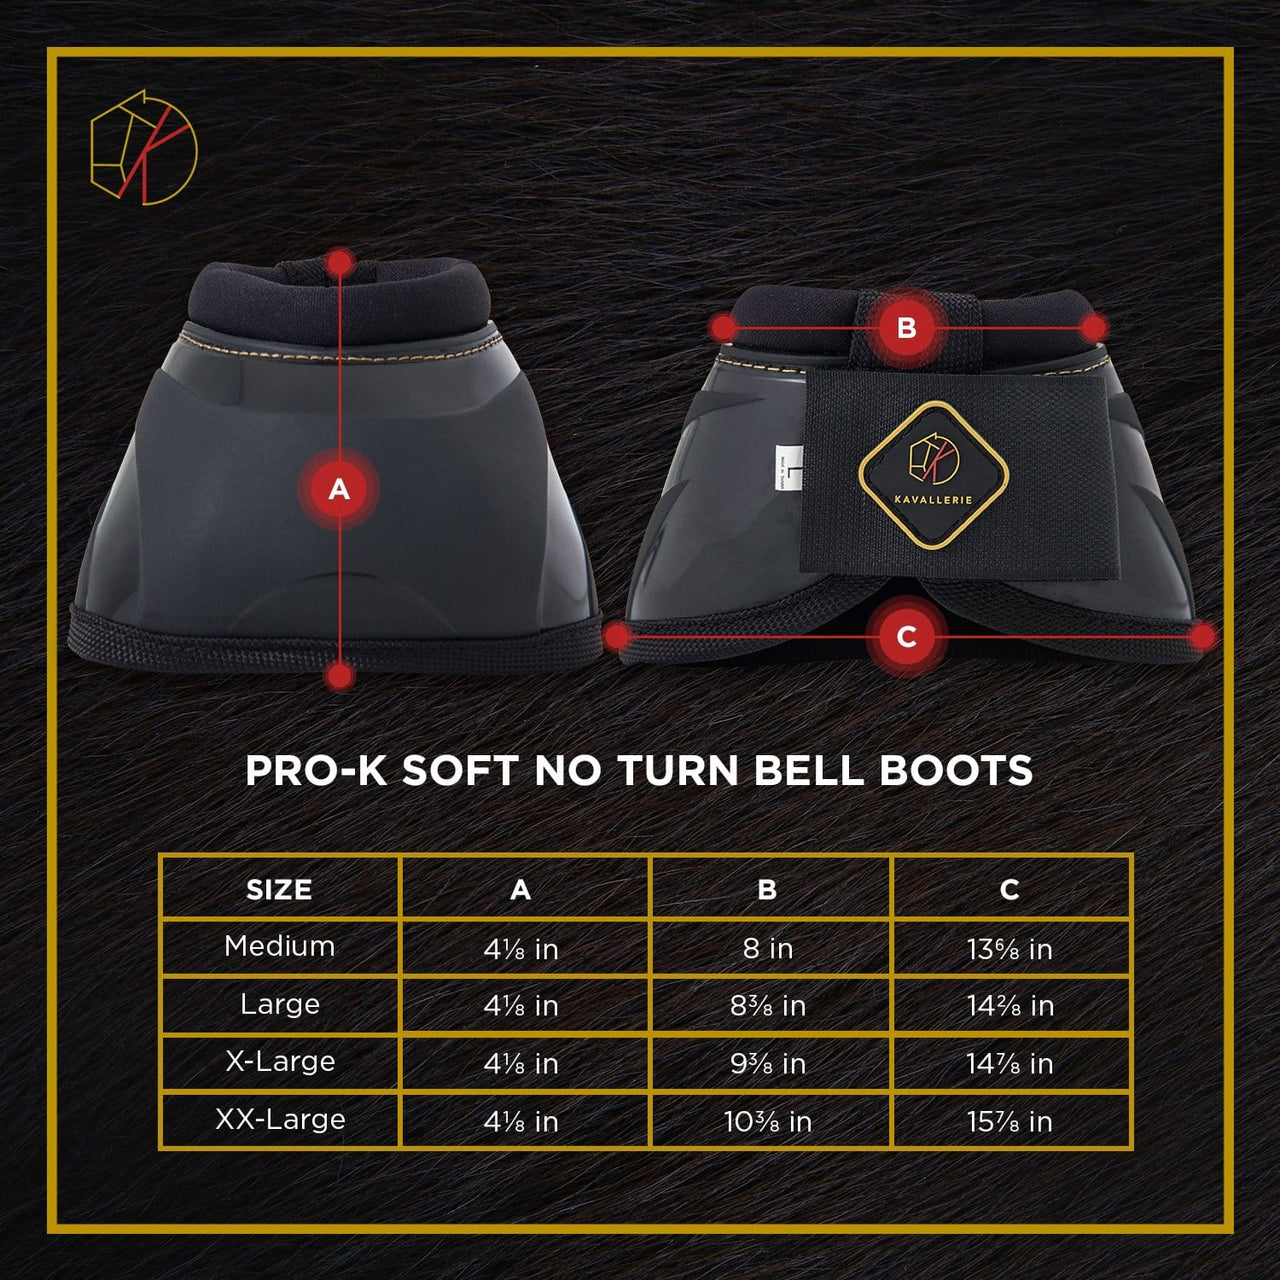 Pro-K Soft No Turn Bell Boots